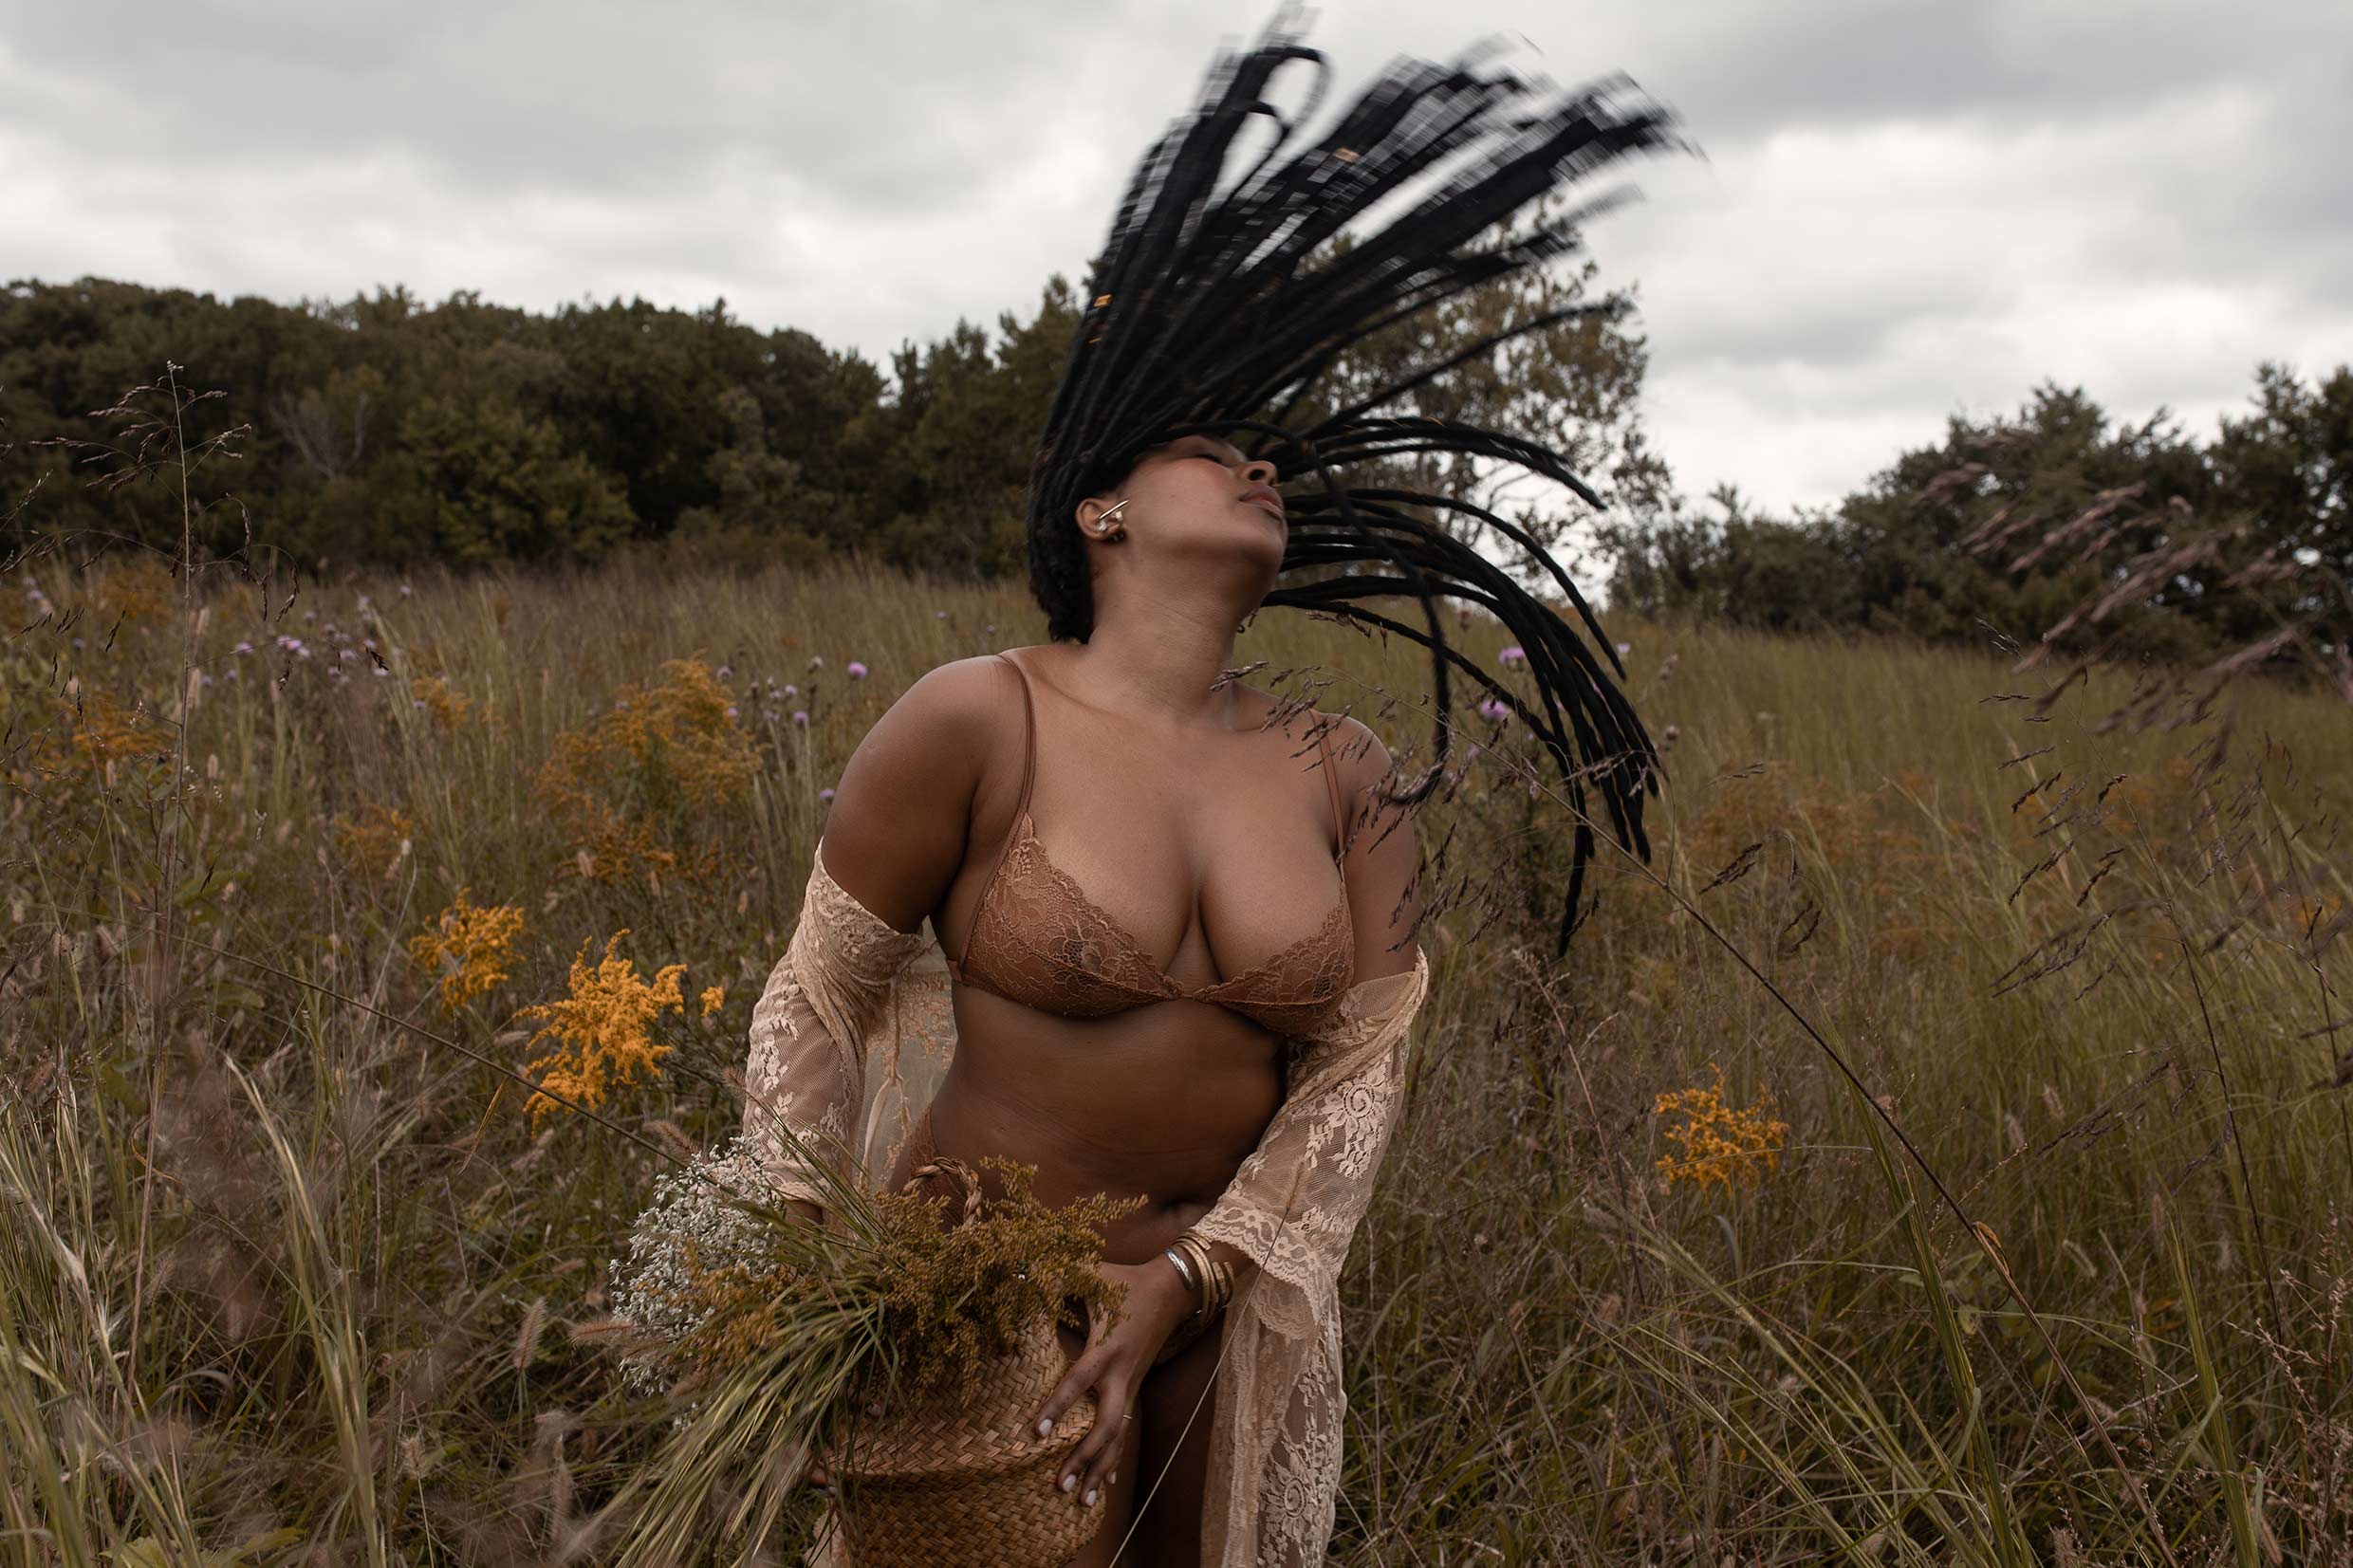 Curvy woman in grassland wearing beautiful undergarments holds a basket and is flipping her locs back.